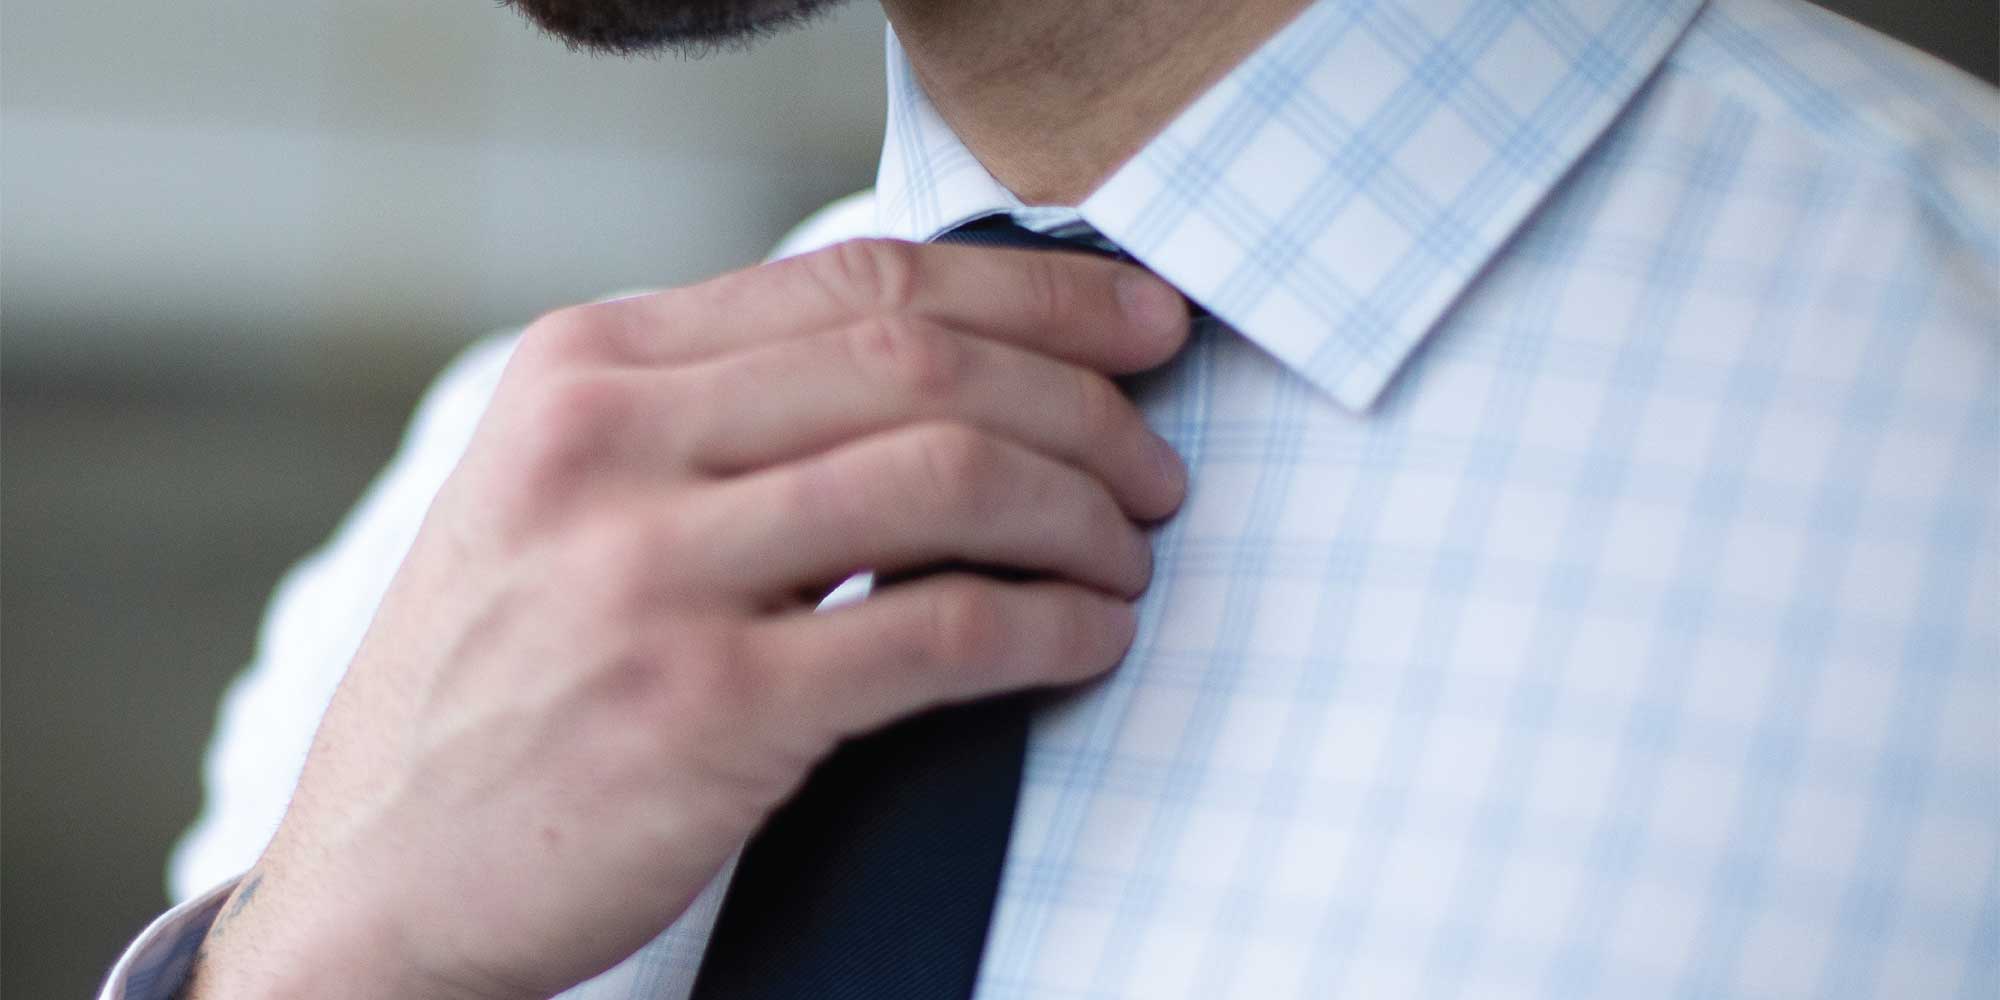 Close up on man holding tie on collared shirt